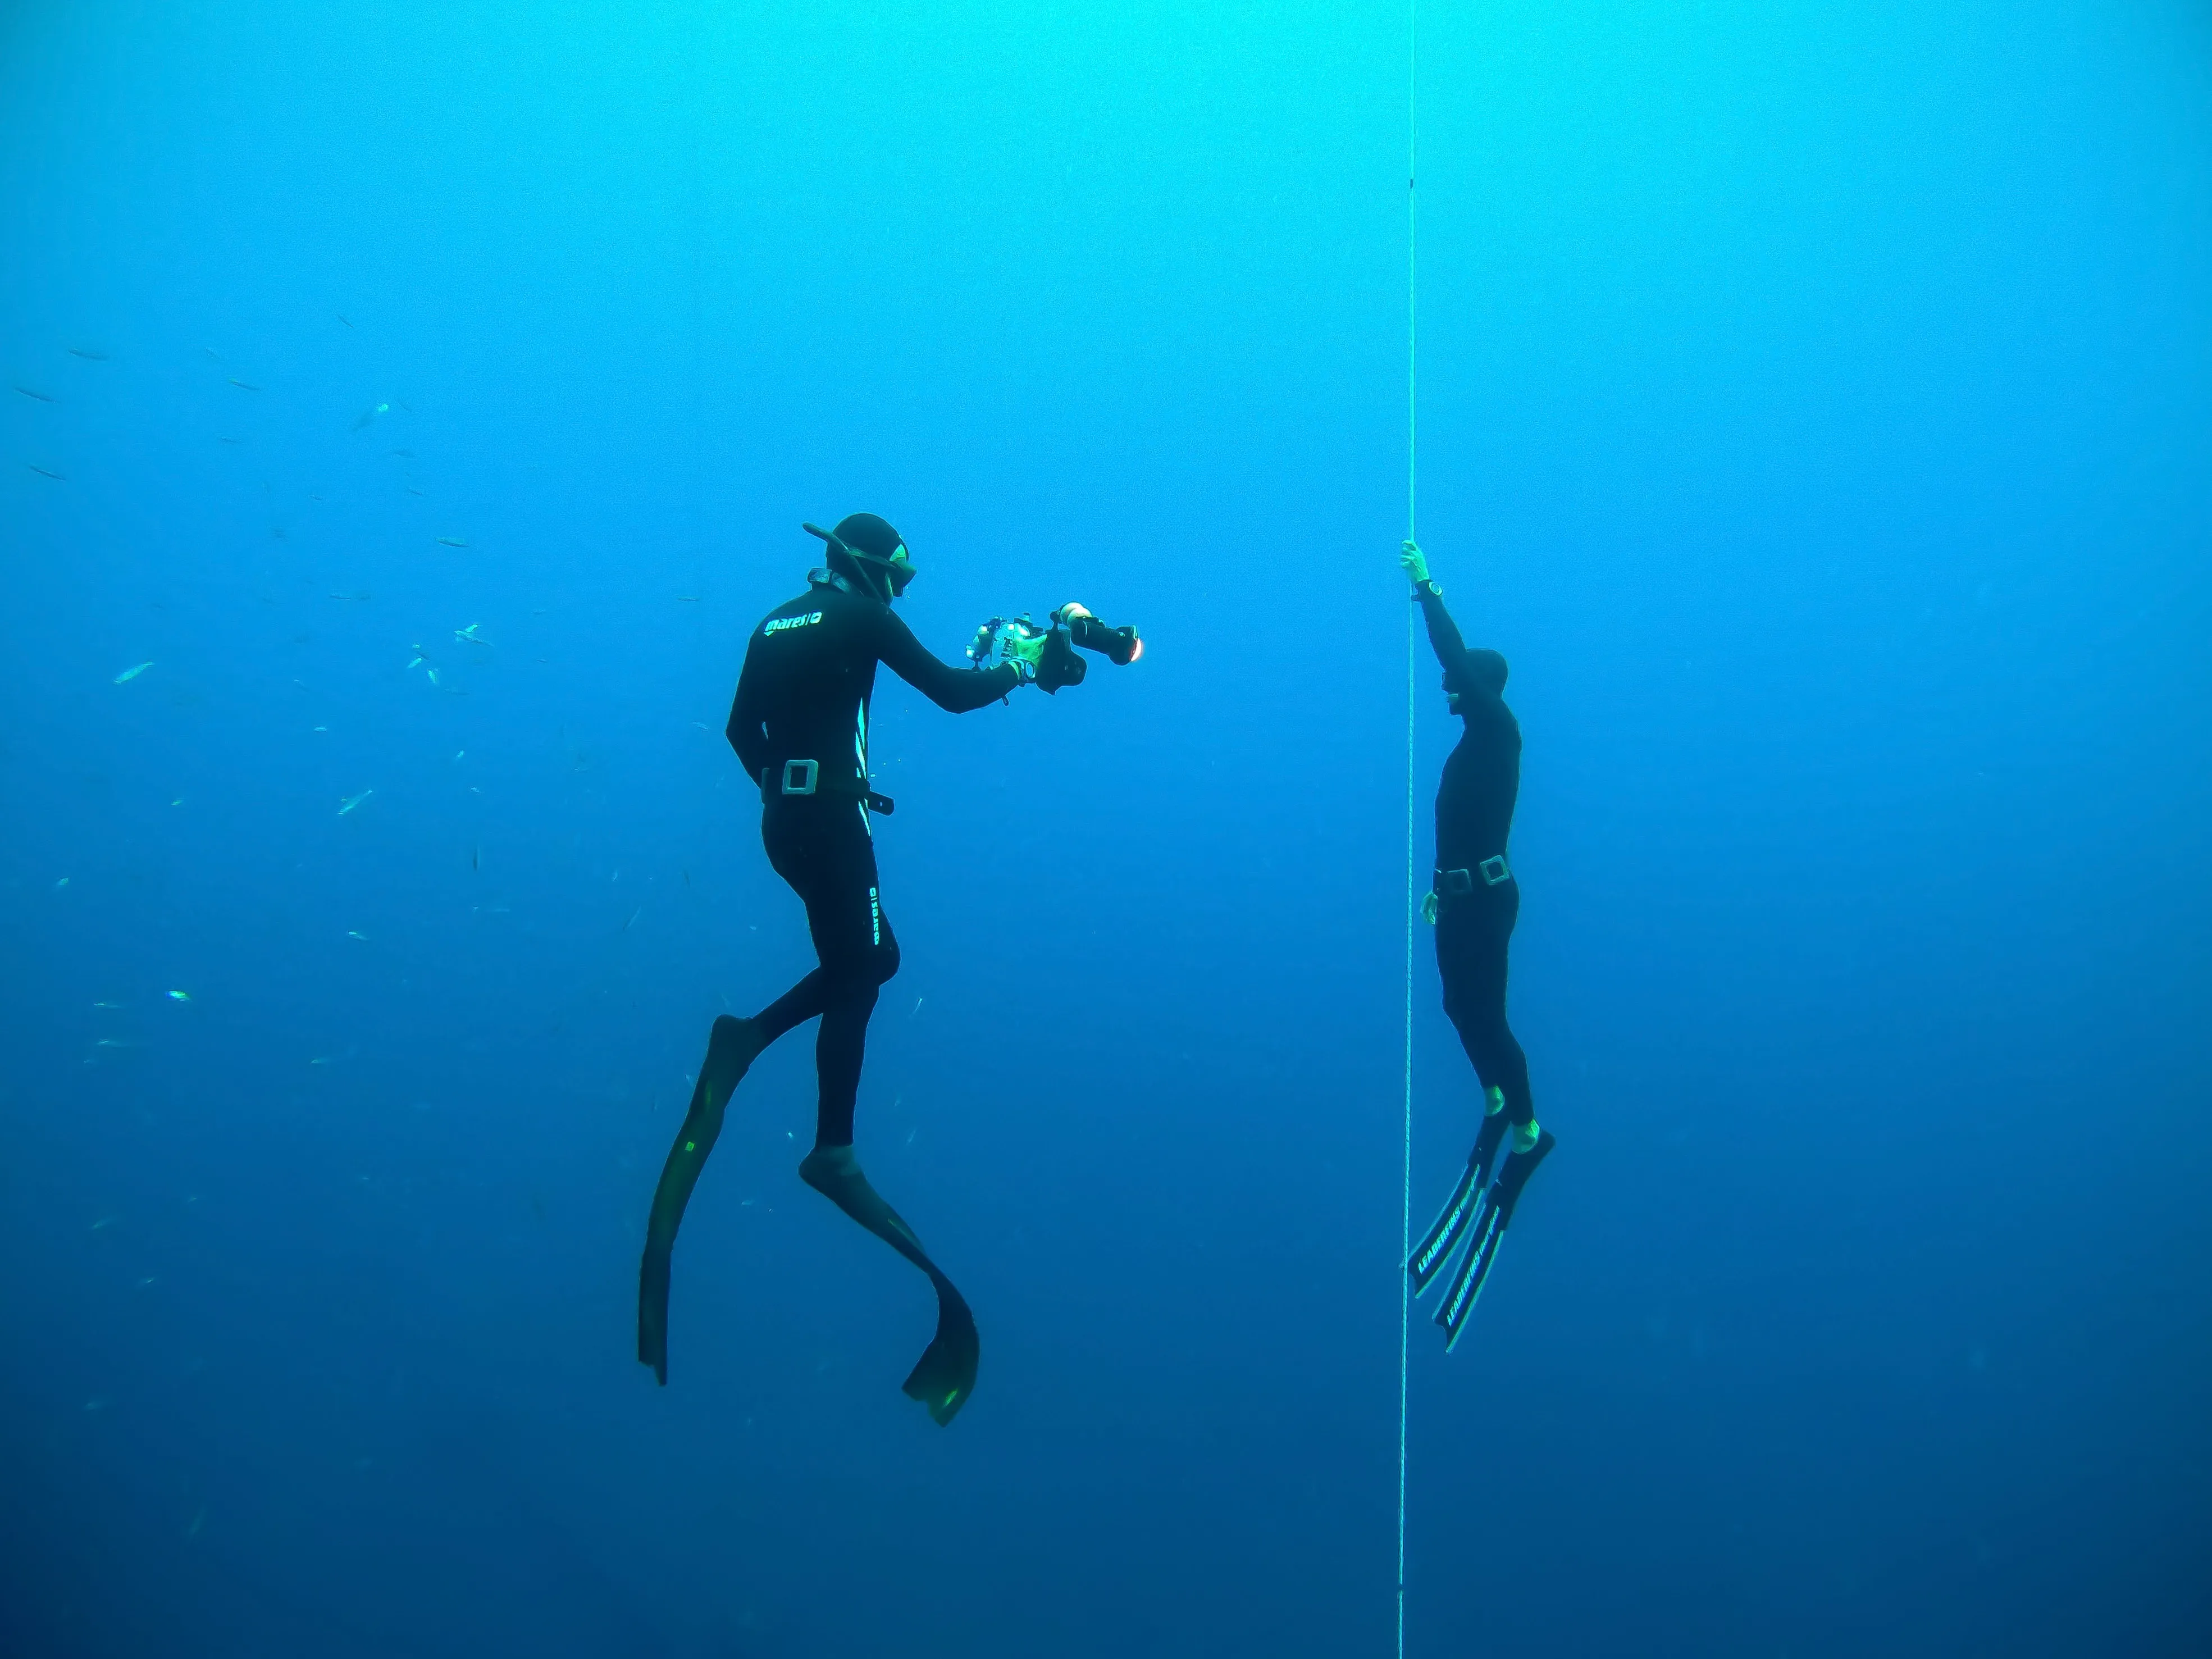 A freediving instructor is filming and ascending with a student in a lake in Zurich, Switzerland.